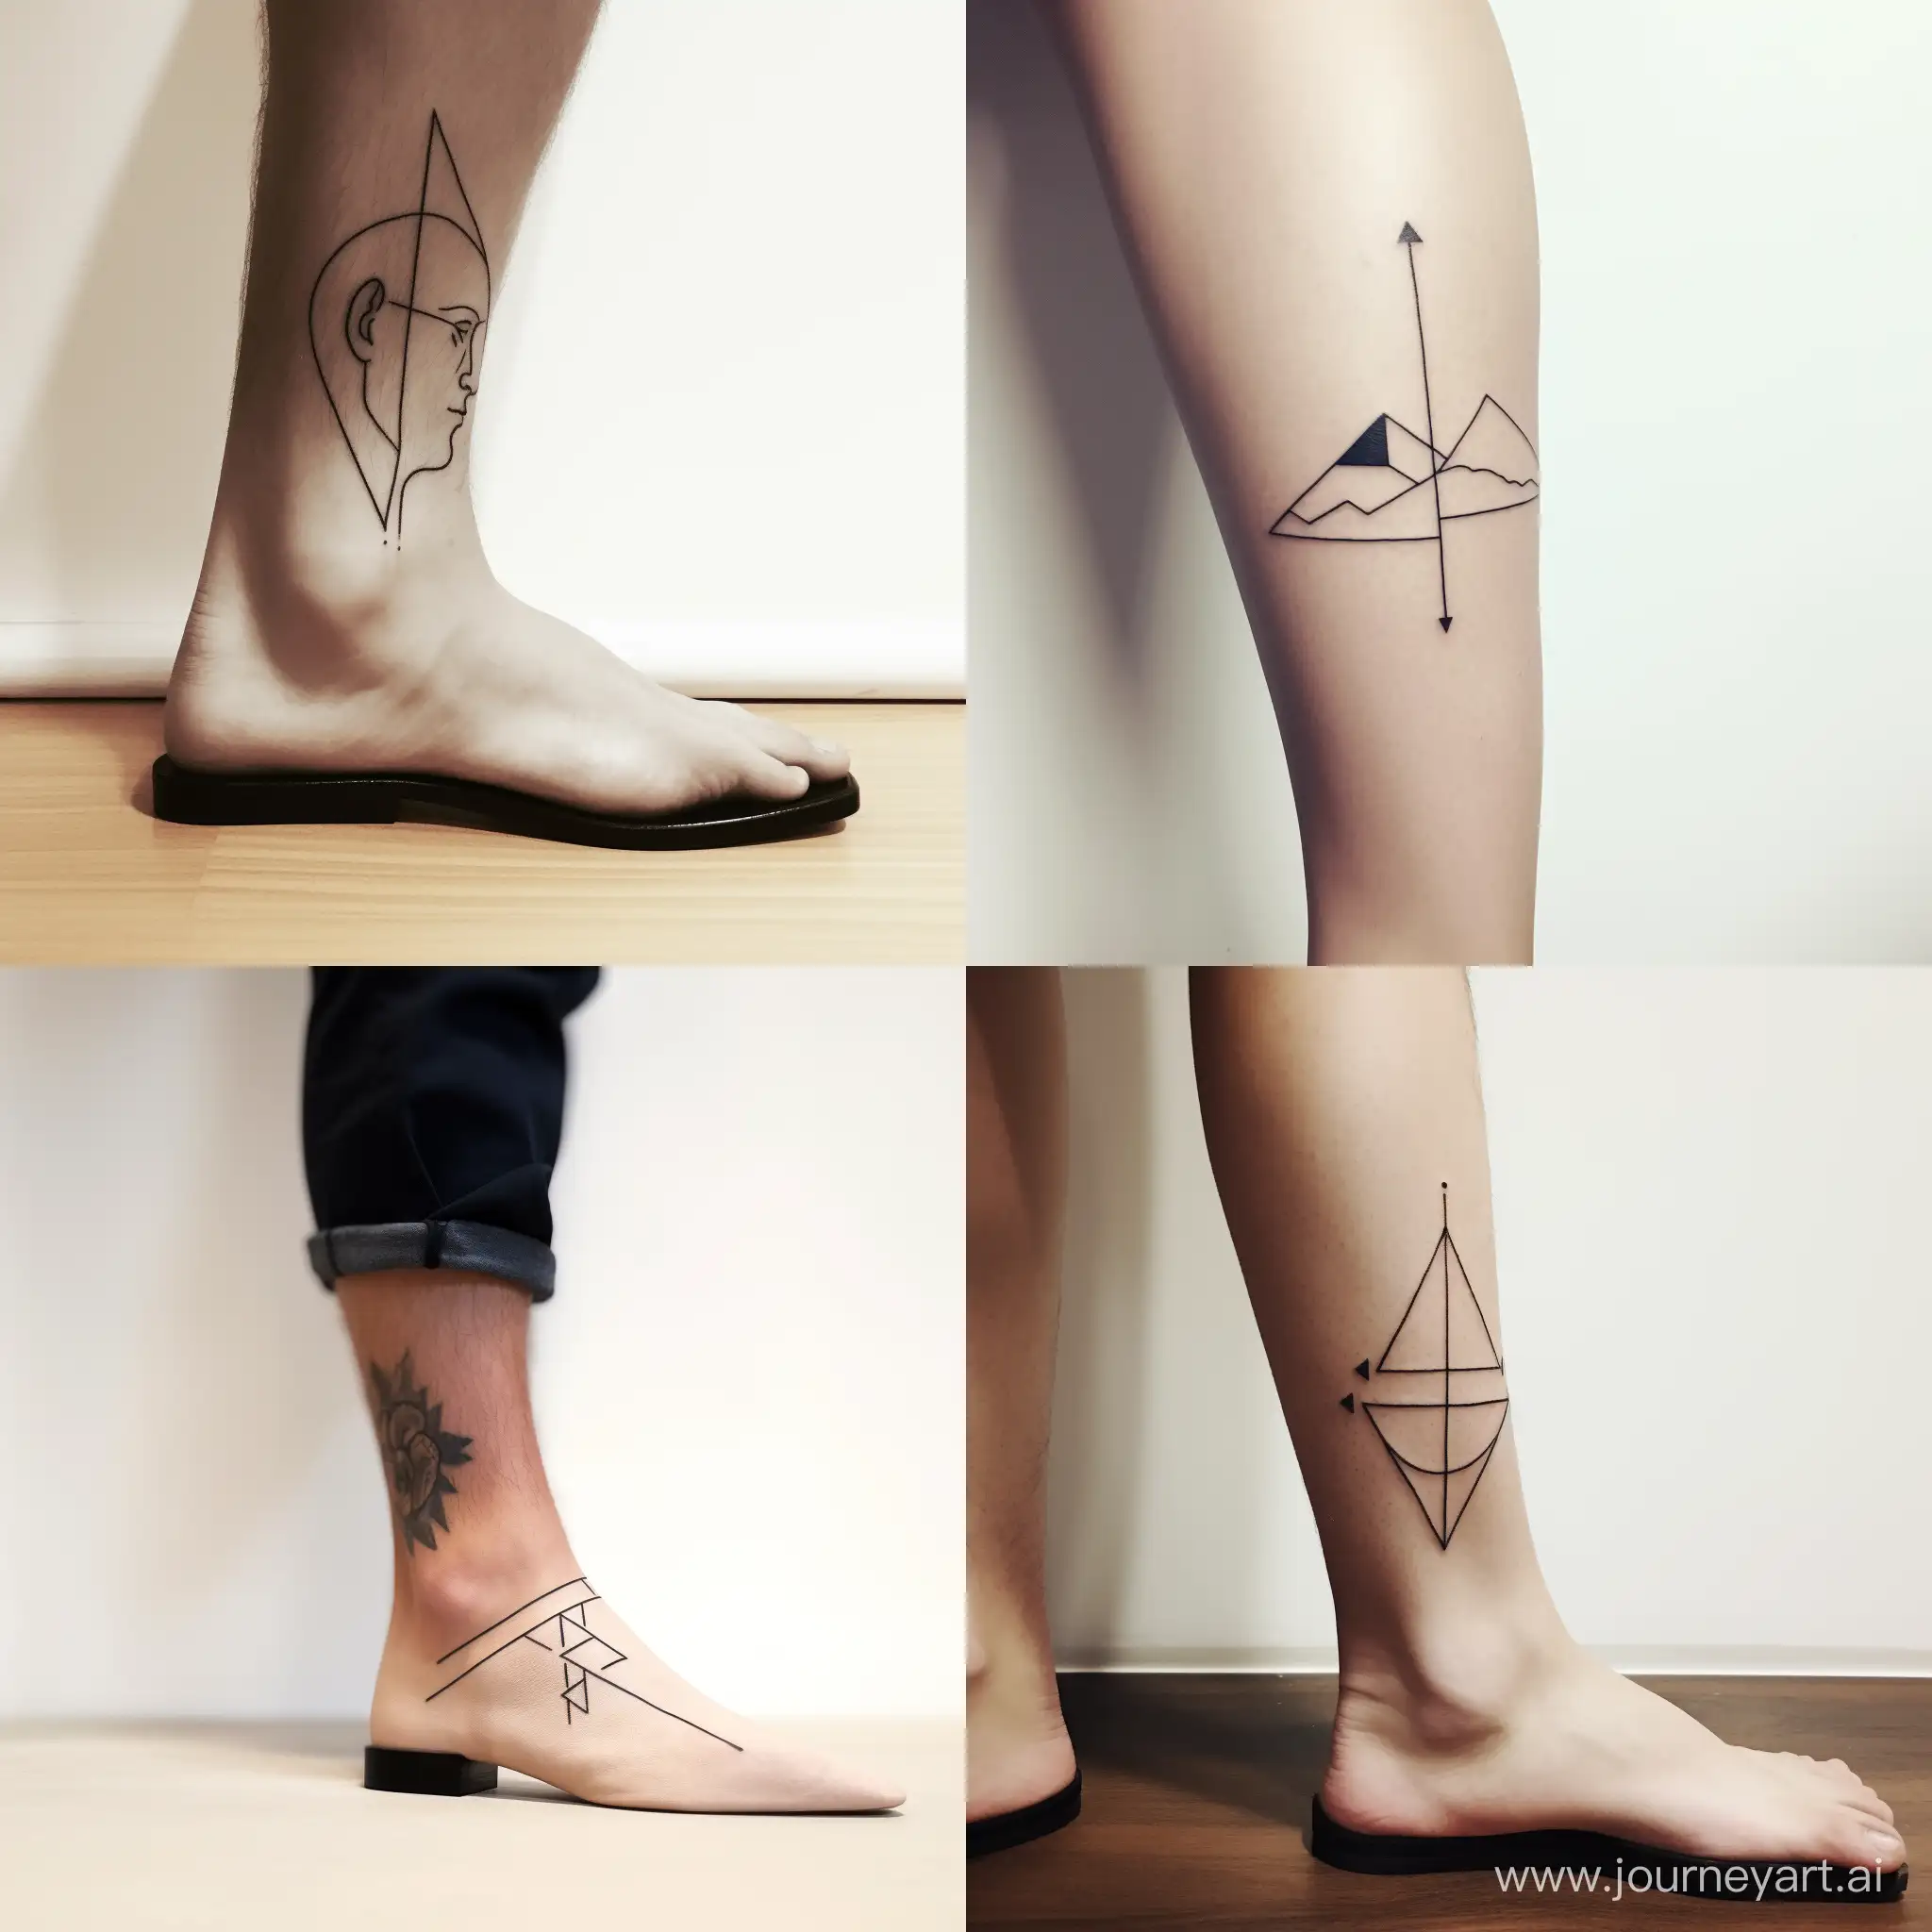 Minimalist-Number-444-Tattoo-on-Tanned-White-Mans-Ankle